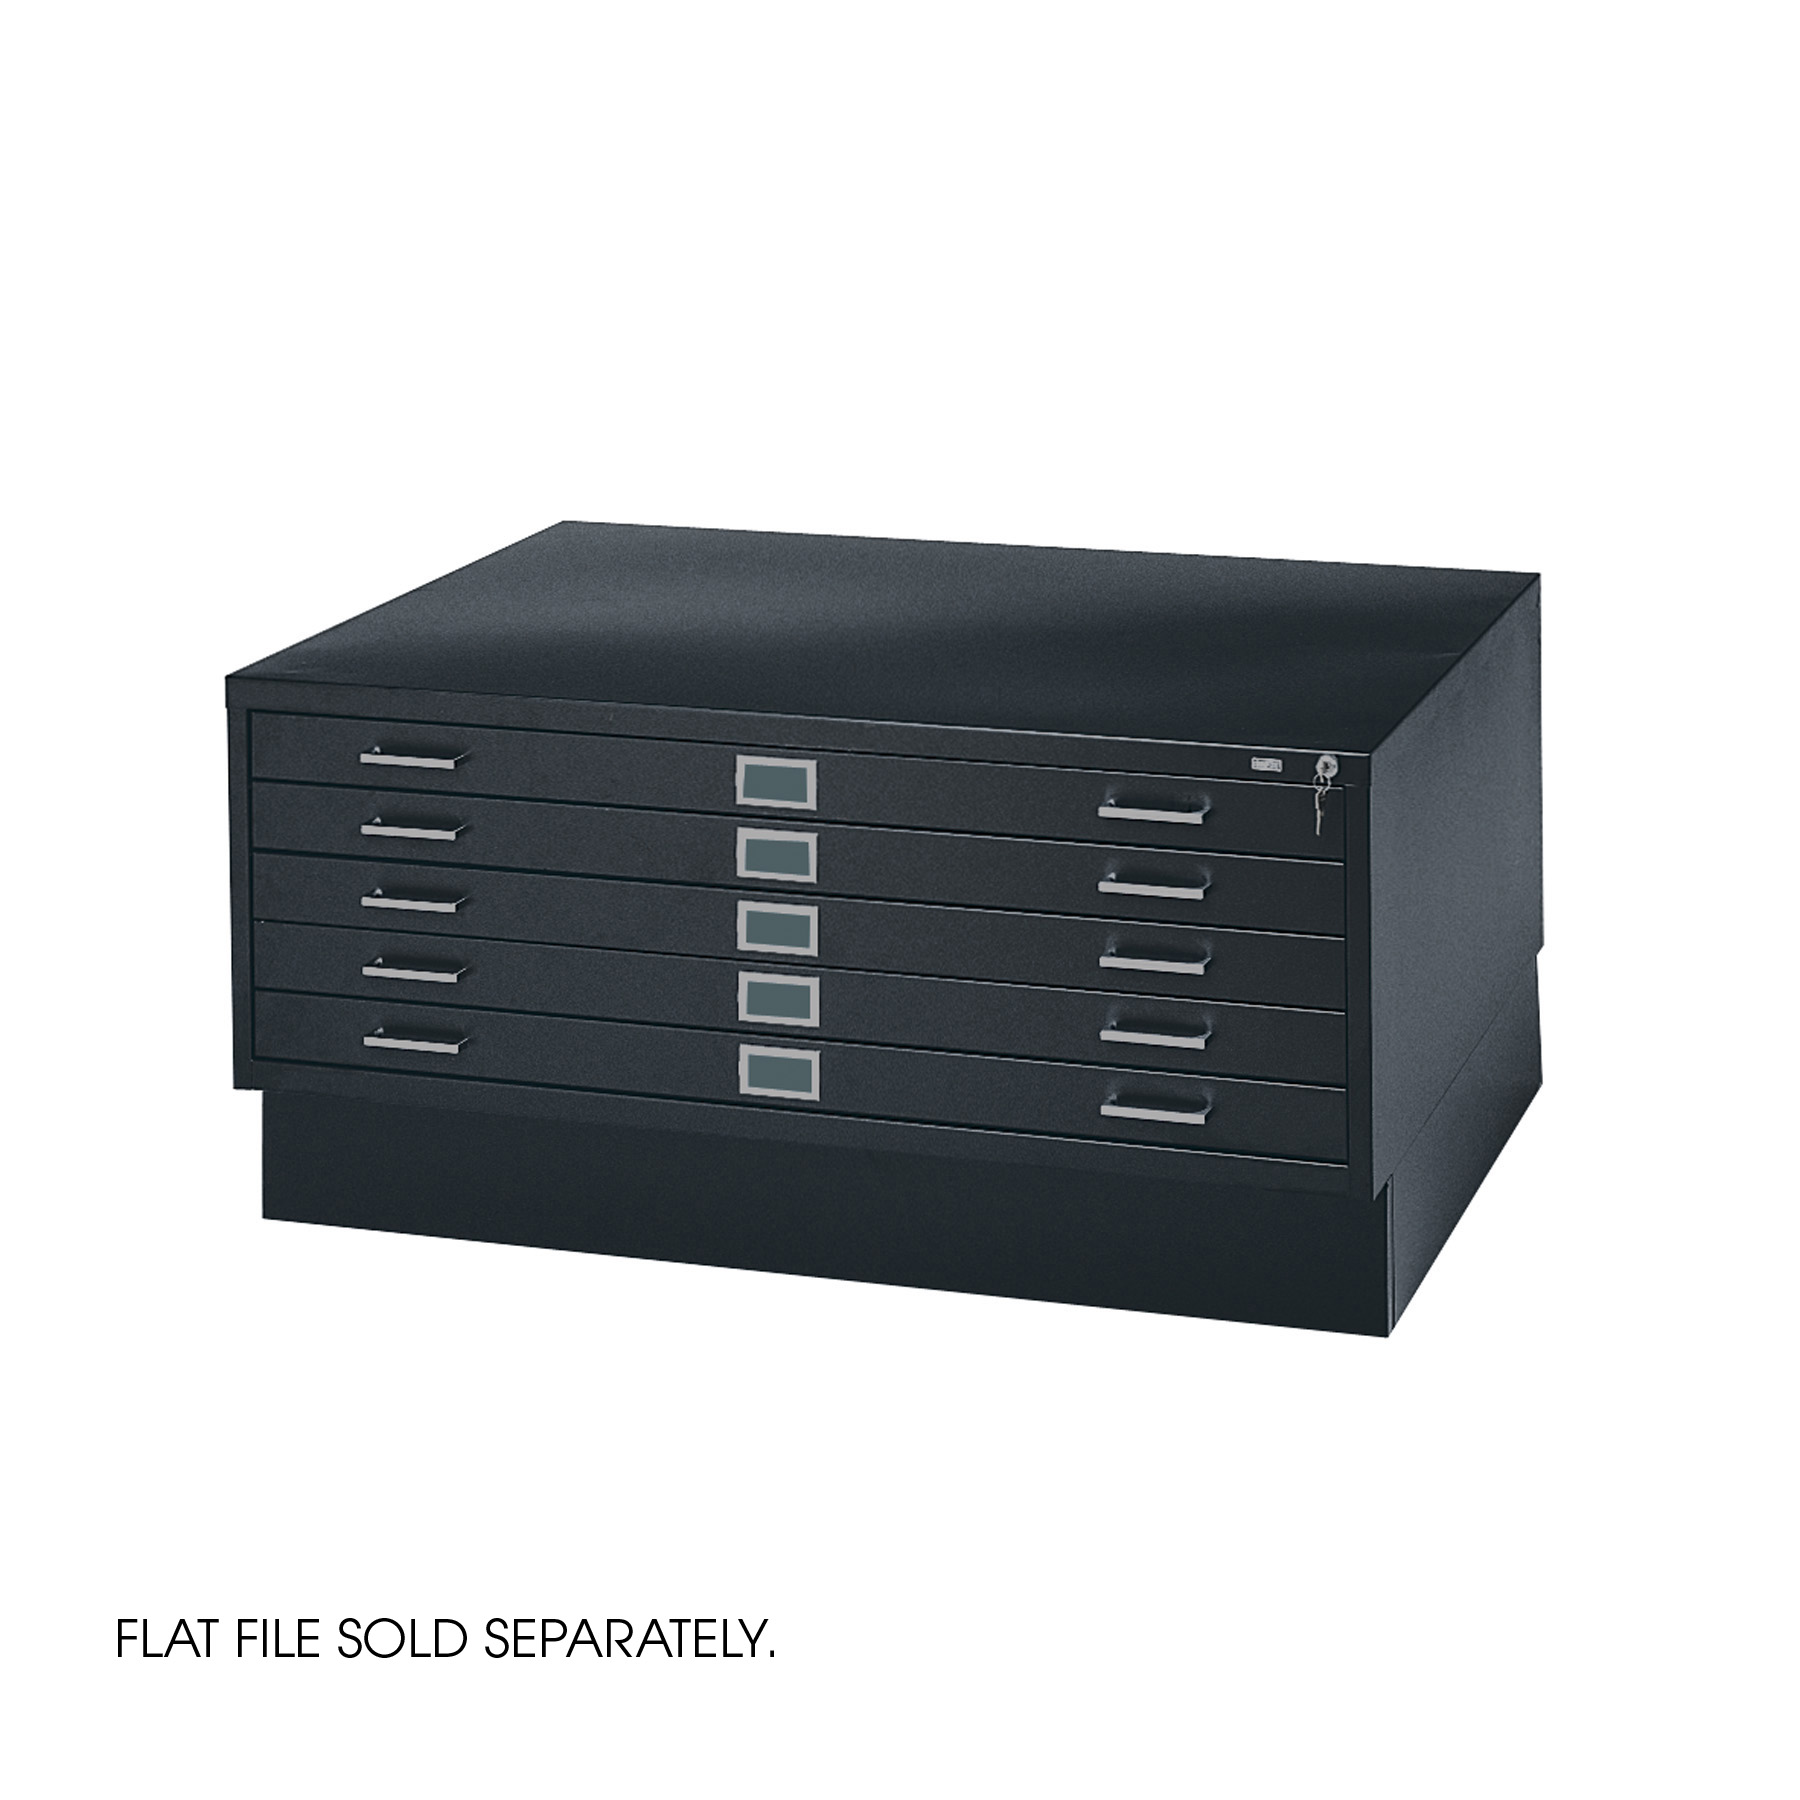 Safco Products 4997BLR Flat File Closed Base for 5-Drawer 4996BLR and 10  Drawer 4986BL Flat Files, Sold Separately, Black